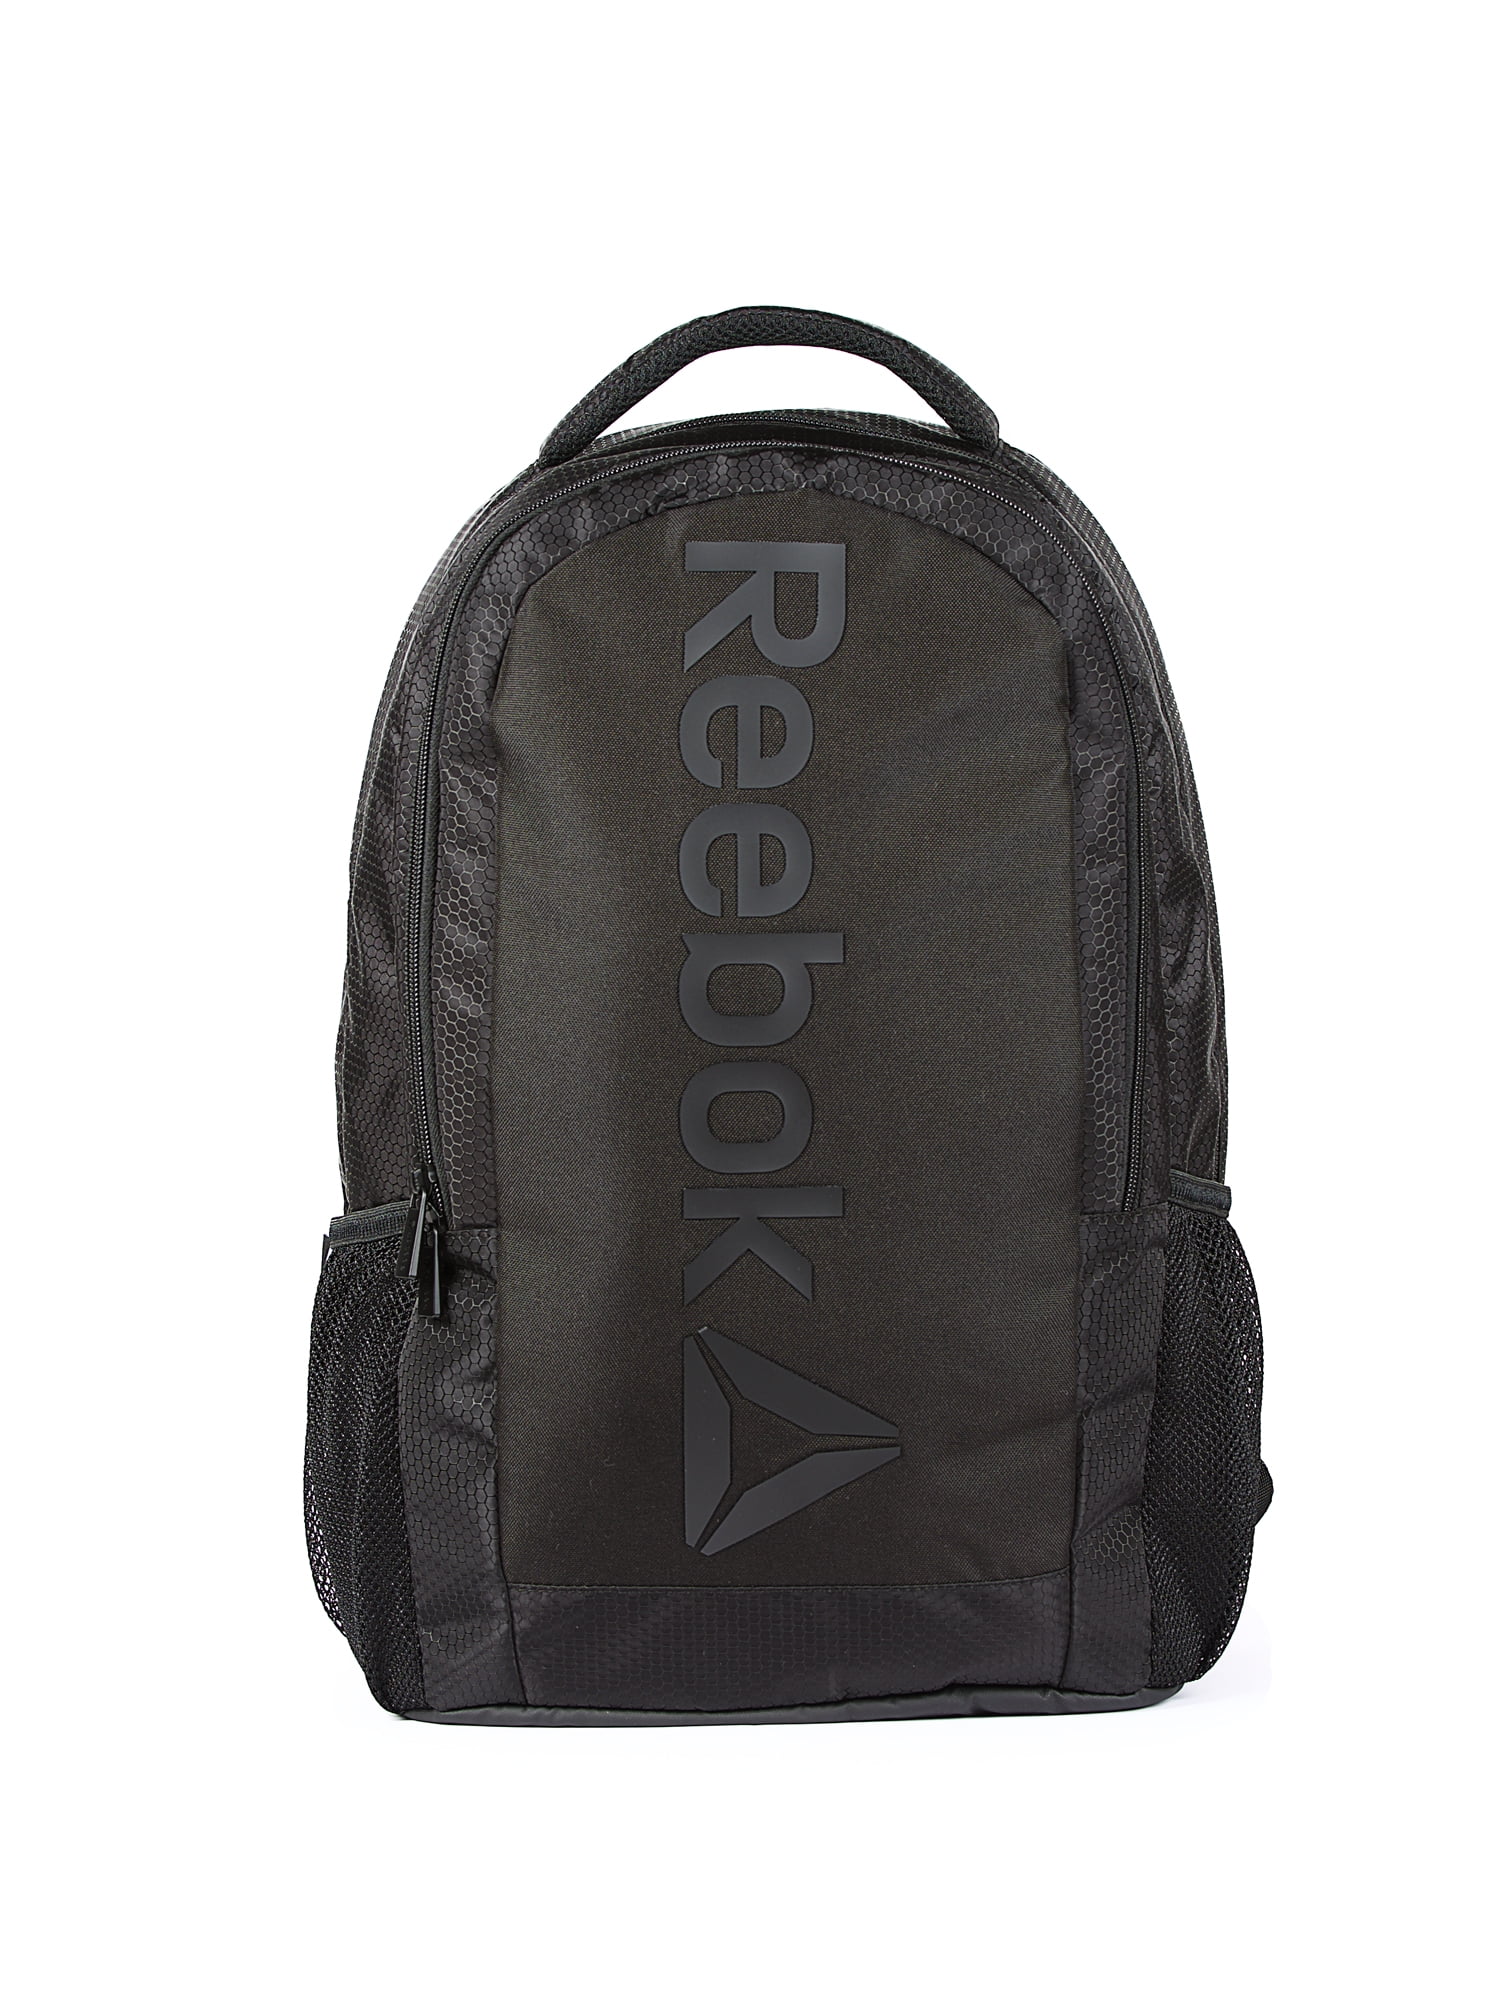 Dropship Reebok Childrens Arden Unisex Laptop Backpack, 2-Piece Lunch Set,  Surf Blue to Sell Online at a Lower Price | Doba